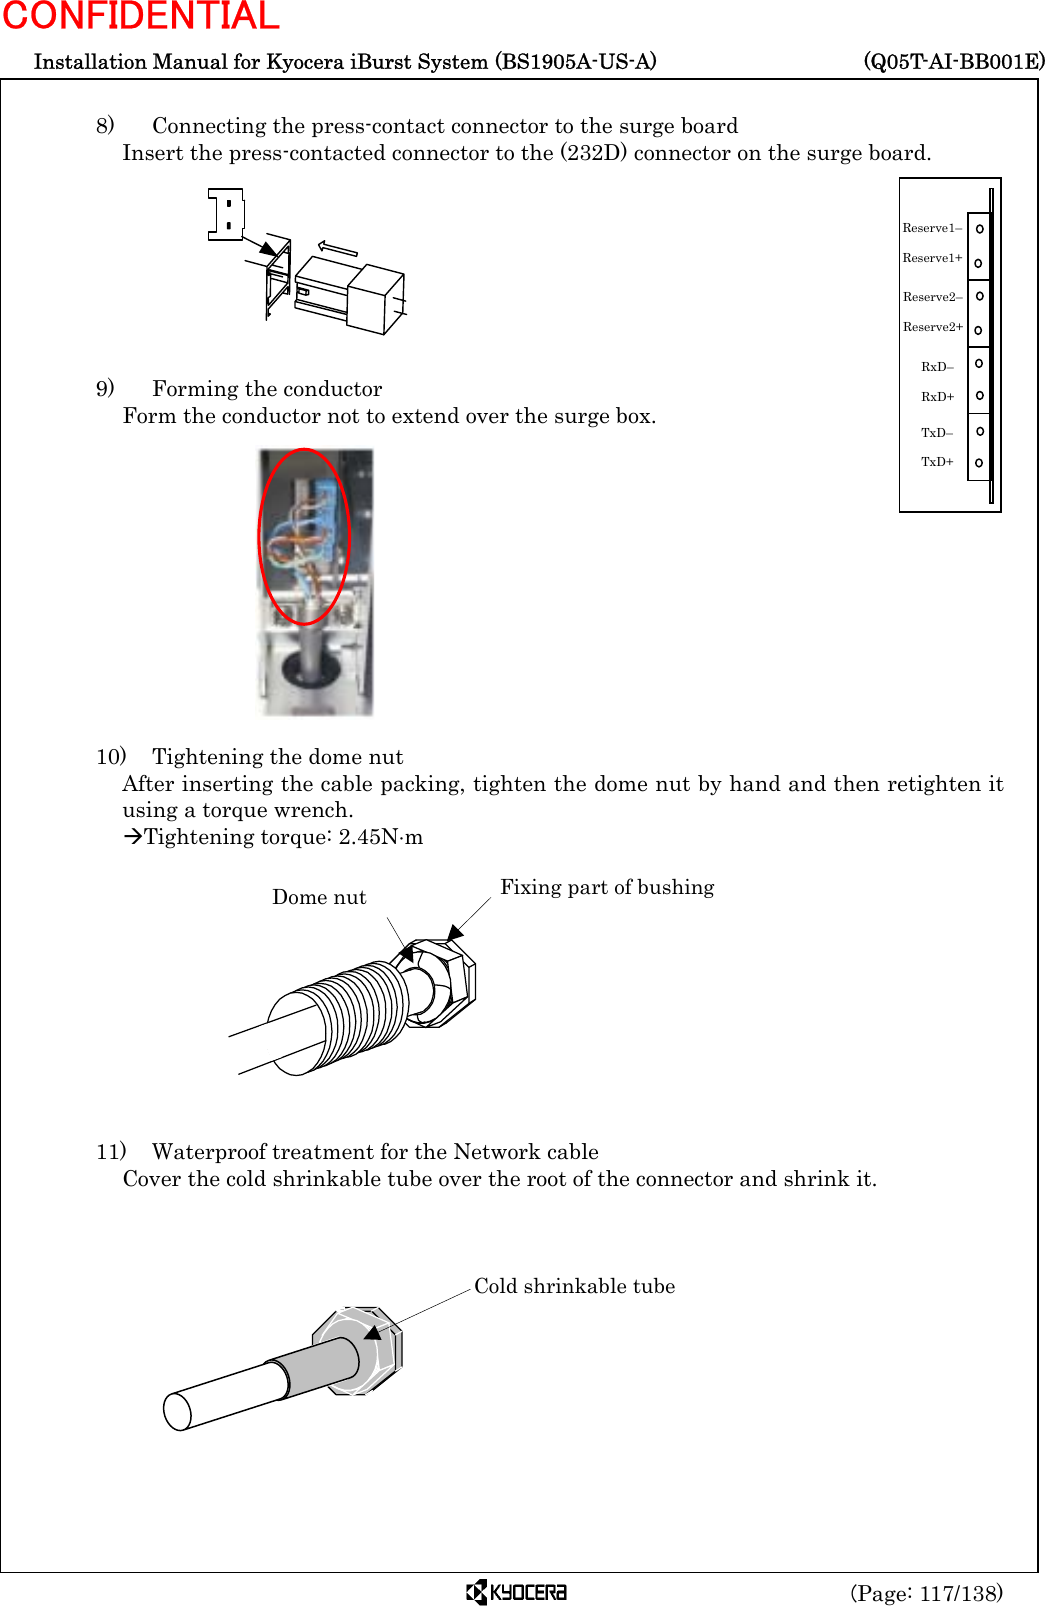  Installation Manual for Kyocera iBurst System (BS1905A-US-A)     (Q05T-AI-BB001E) (Page: 117/138) CONFIDENTIAL  8)   Connecting the press-contact connector to the surge board Insert the press-contacted connector to the (232D) connector on the surge board.         9)    Forming the conductor Form the conductor not to extend over the surge box.             10)    Tightening the dome nut After inserting the cable packing, tighten the dome nut by hand and then retighten it using a torque wrench. ÆTightening torque: 2.45N⋅m            11)    Waterproof treatment for the Network cable Cover the cold shrinkable tube over the root of the connector and shrink it.         Dome nut  Fixing part of bushing Cold shrinkable tube RxD–  RxD+ TxD–  TxD+ Reserve1–  Reserve1+ Reserve2–  Reserve2+ 